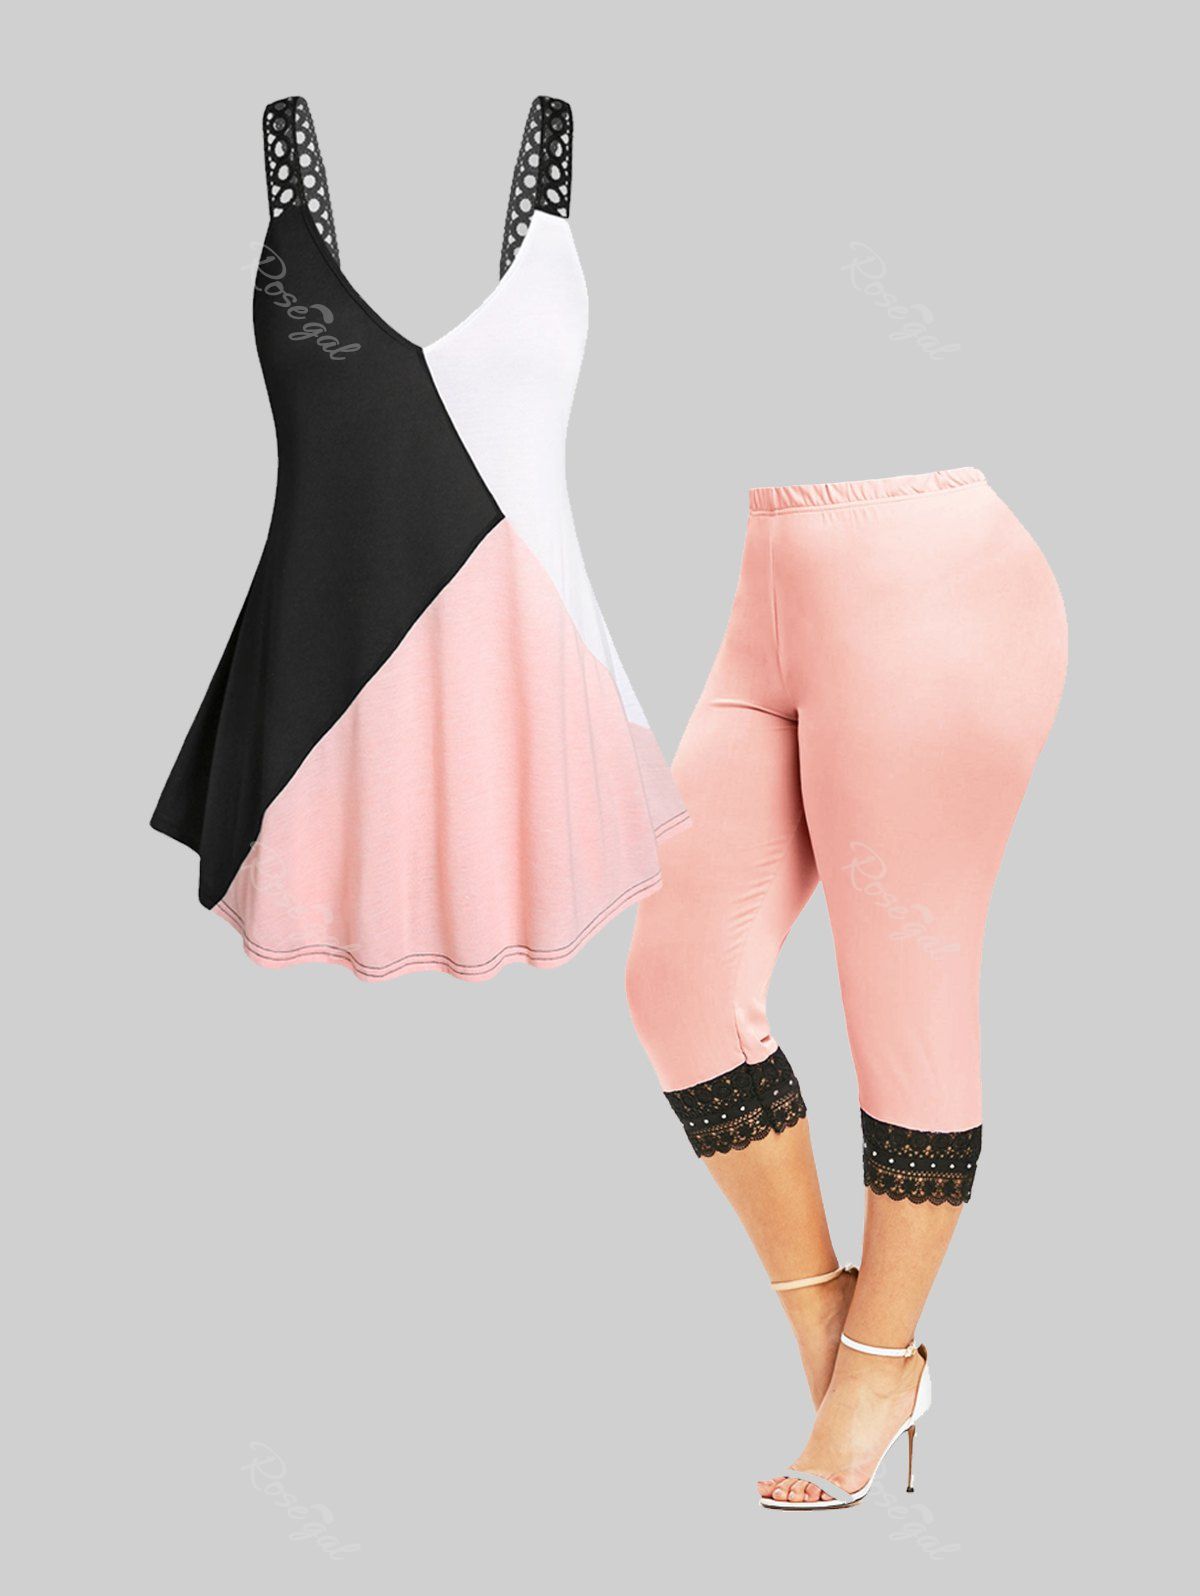 Shop Curve Colorblock Backless Tank Top and Lace Crochet Cropped Leggings Plus Size Summer Outfit  